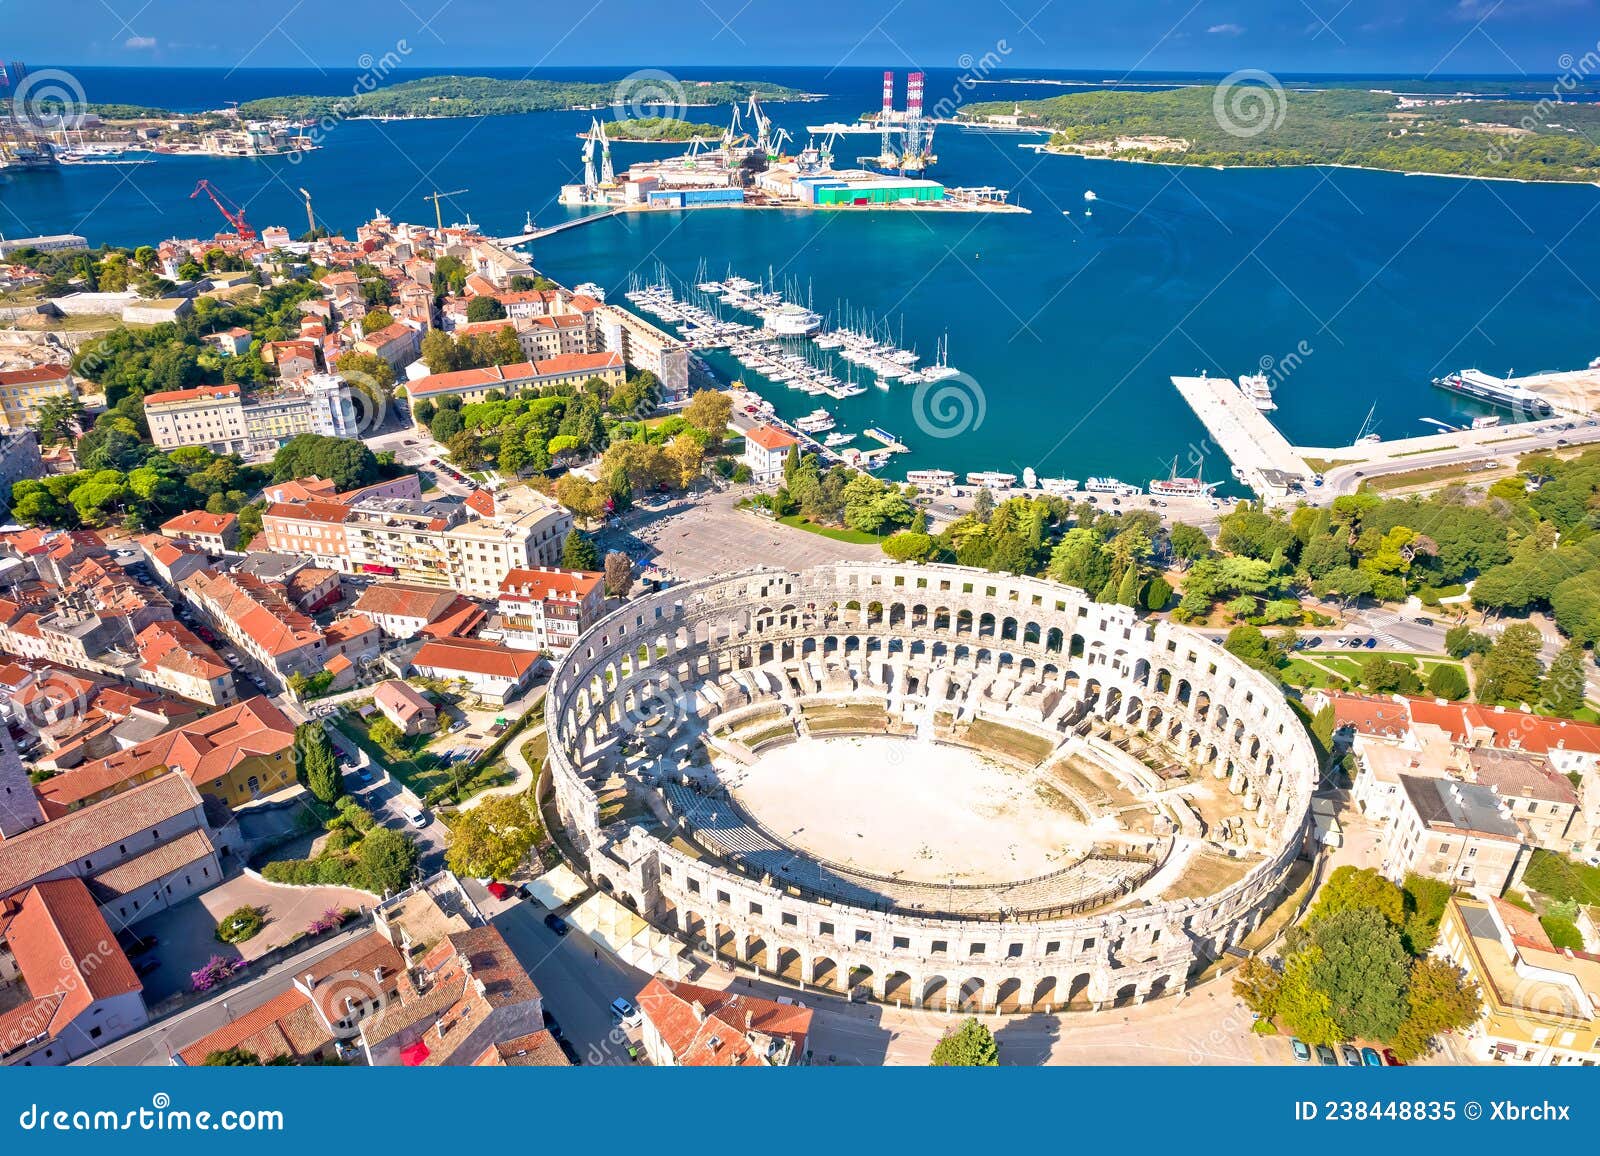 arena pula. ancient ruins of roman amphitheatre and pula waterfront aerial view